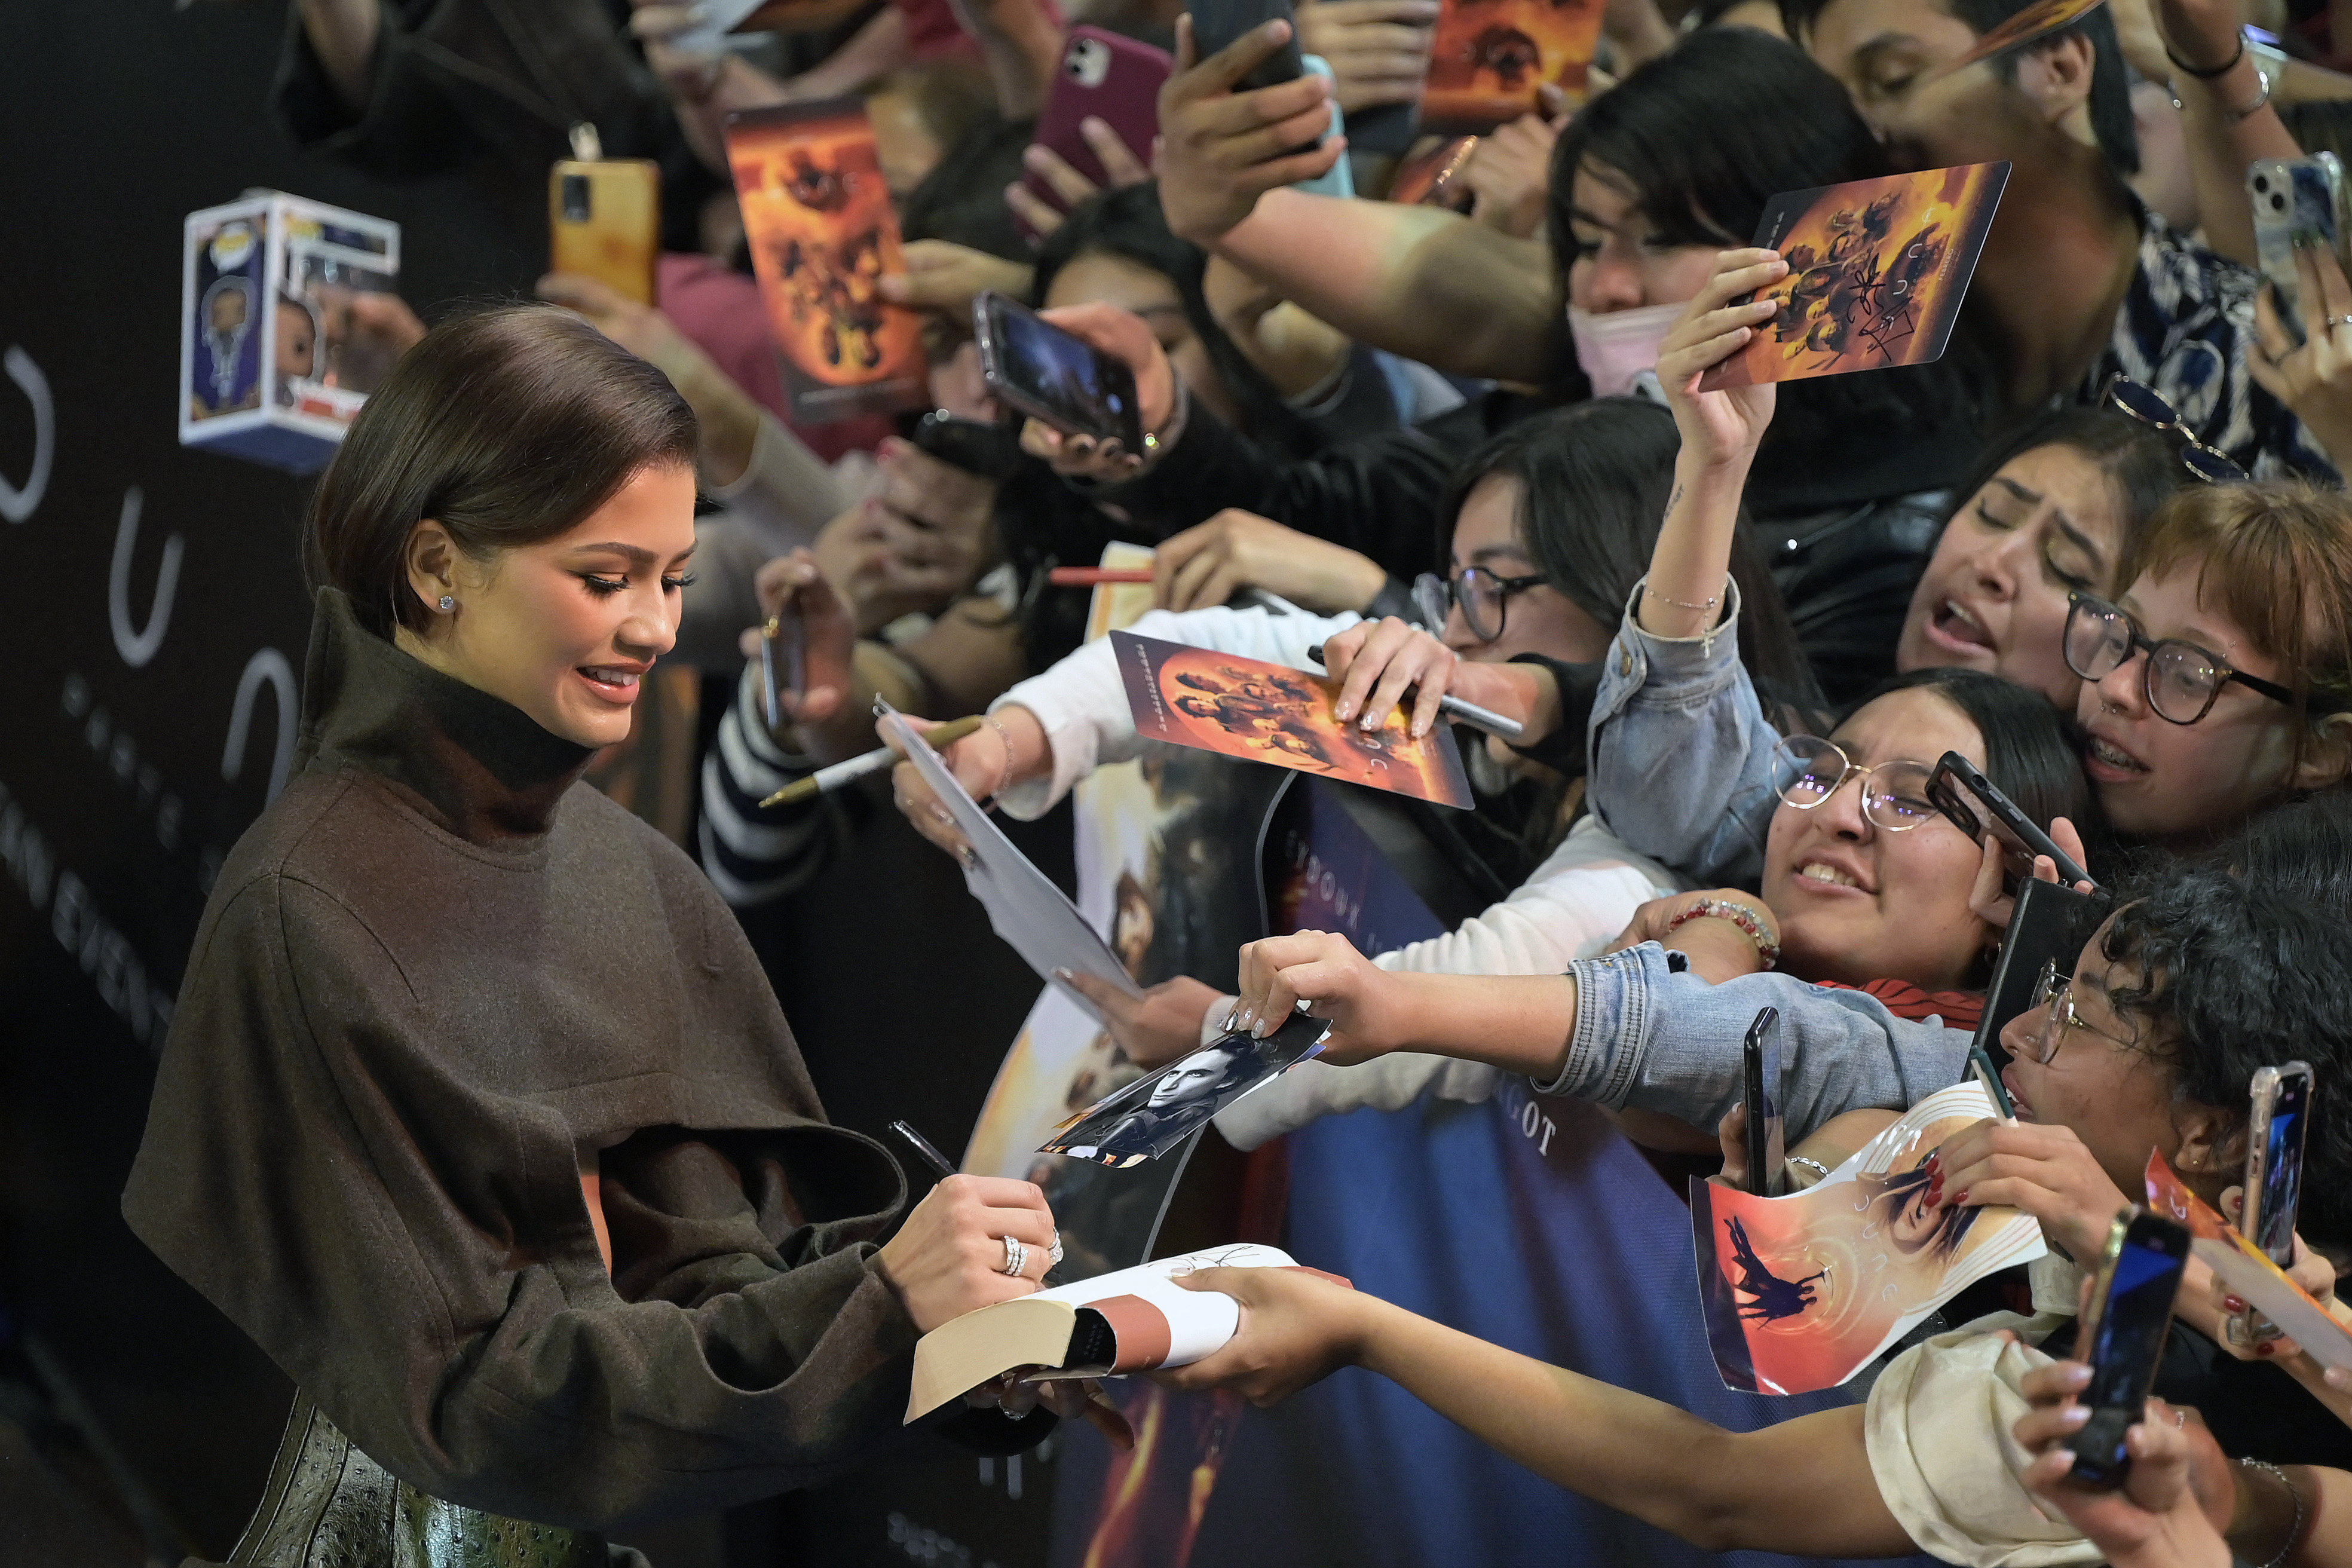 Zendaya interacting with fans and signing autographs while wearing a casual sweater